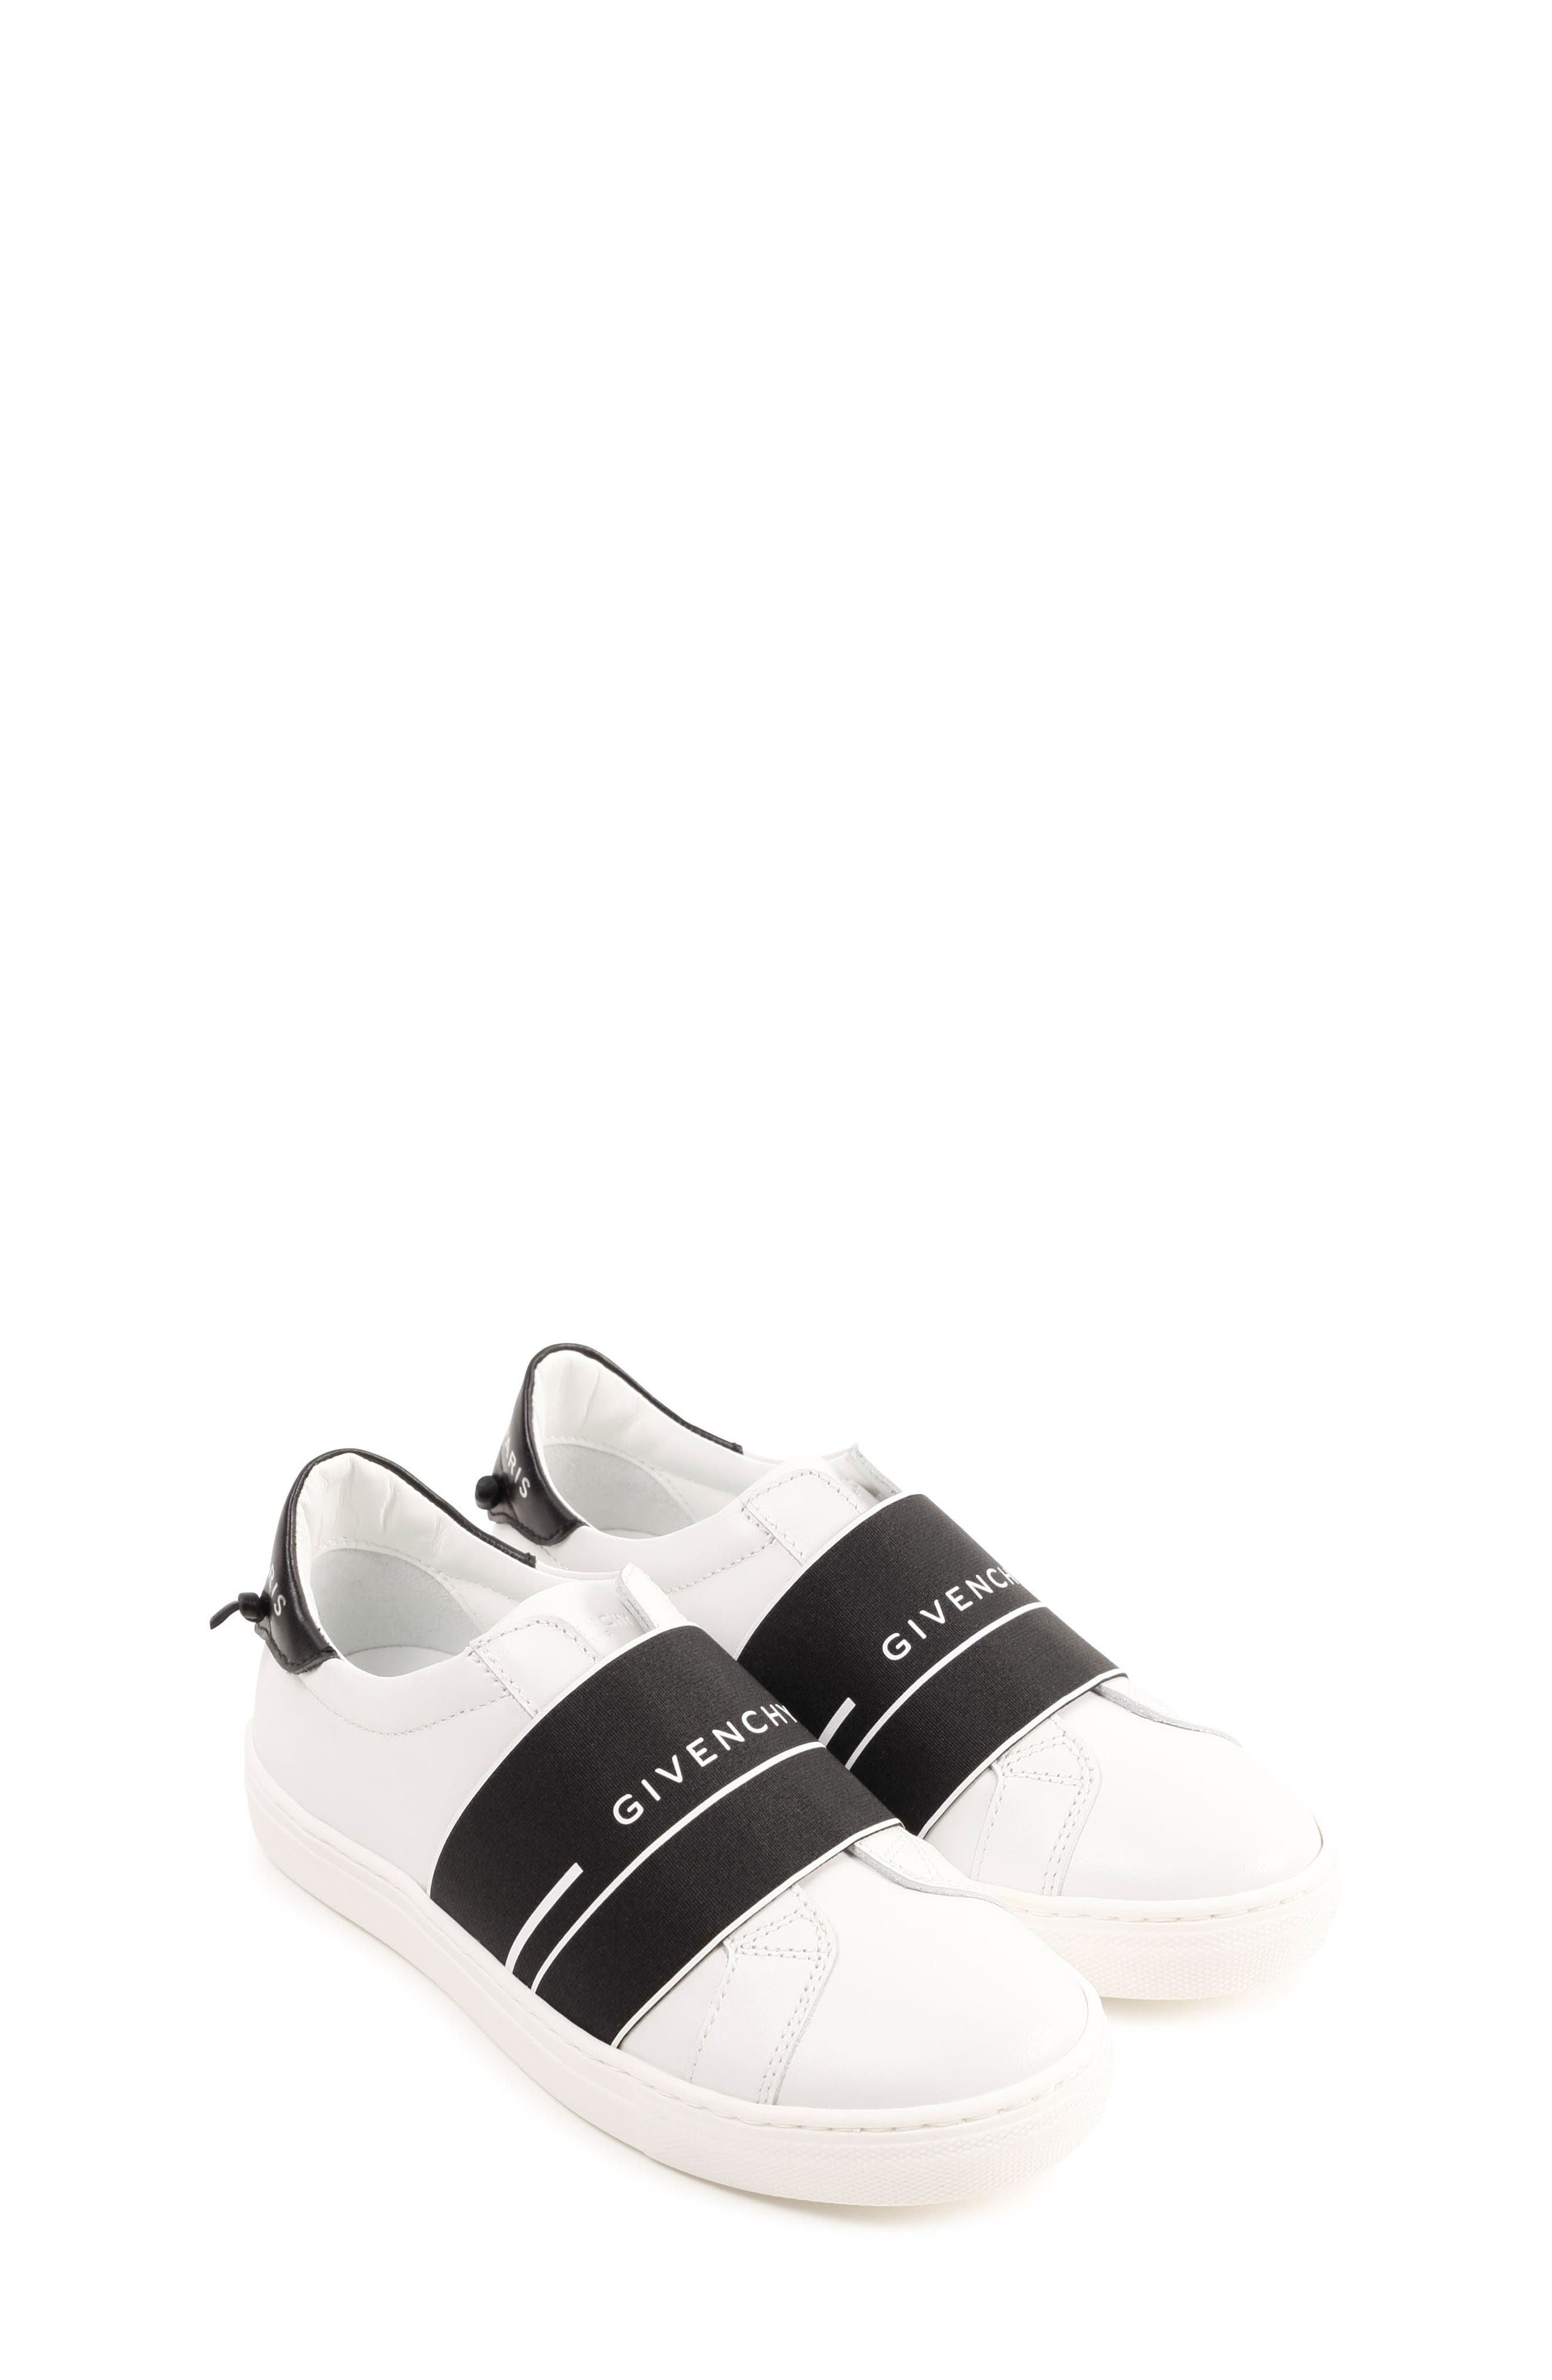 Kids' Givenchy Shoes | Nordstrom